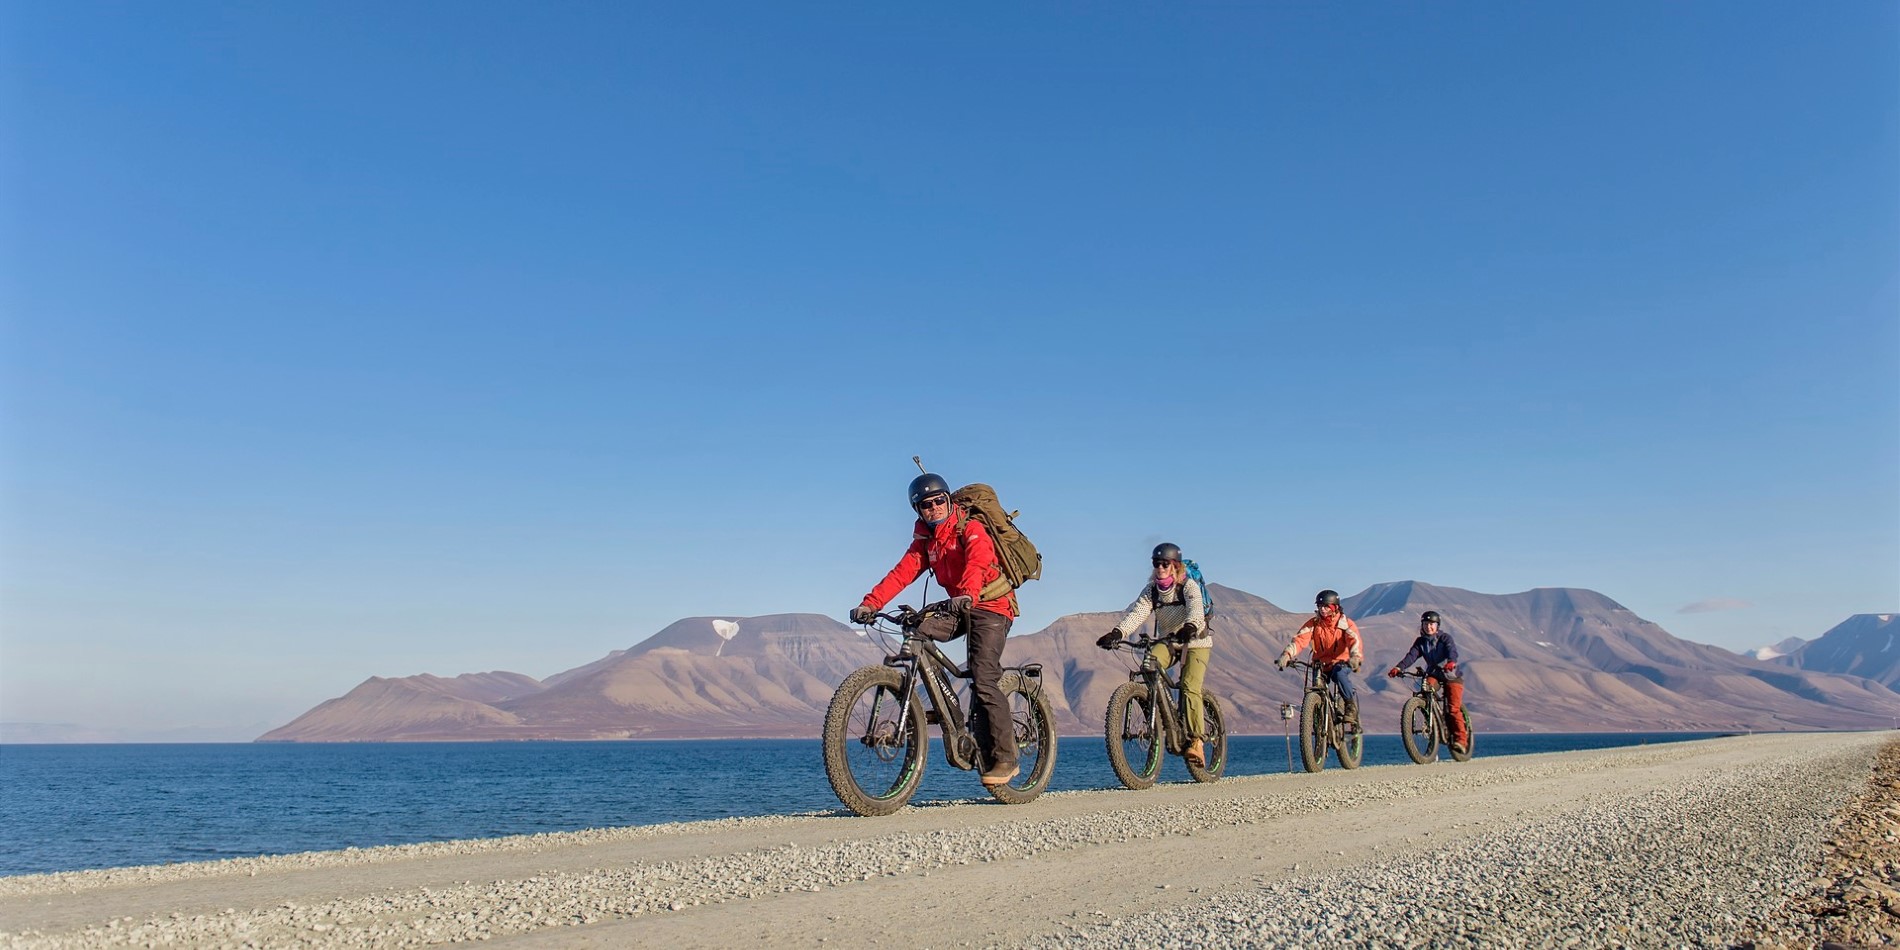 Get equipped with helmets and electric bikes and start a sightseeing trip around Longyearbyen